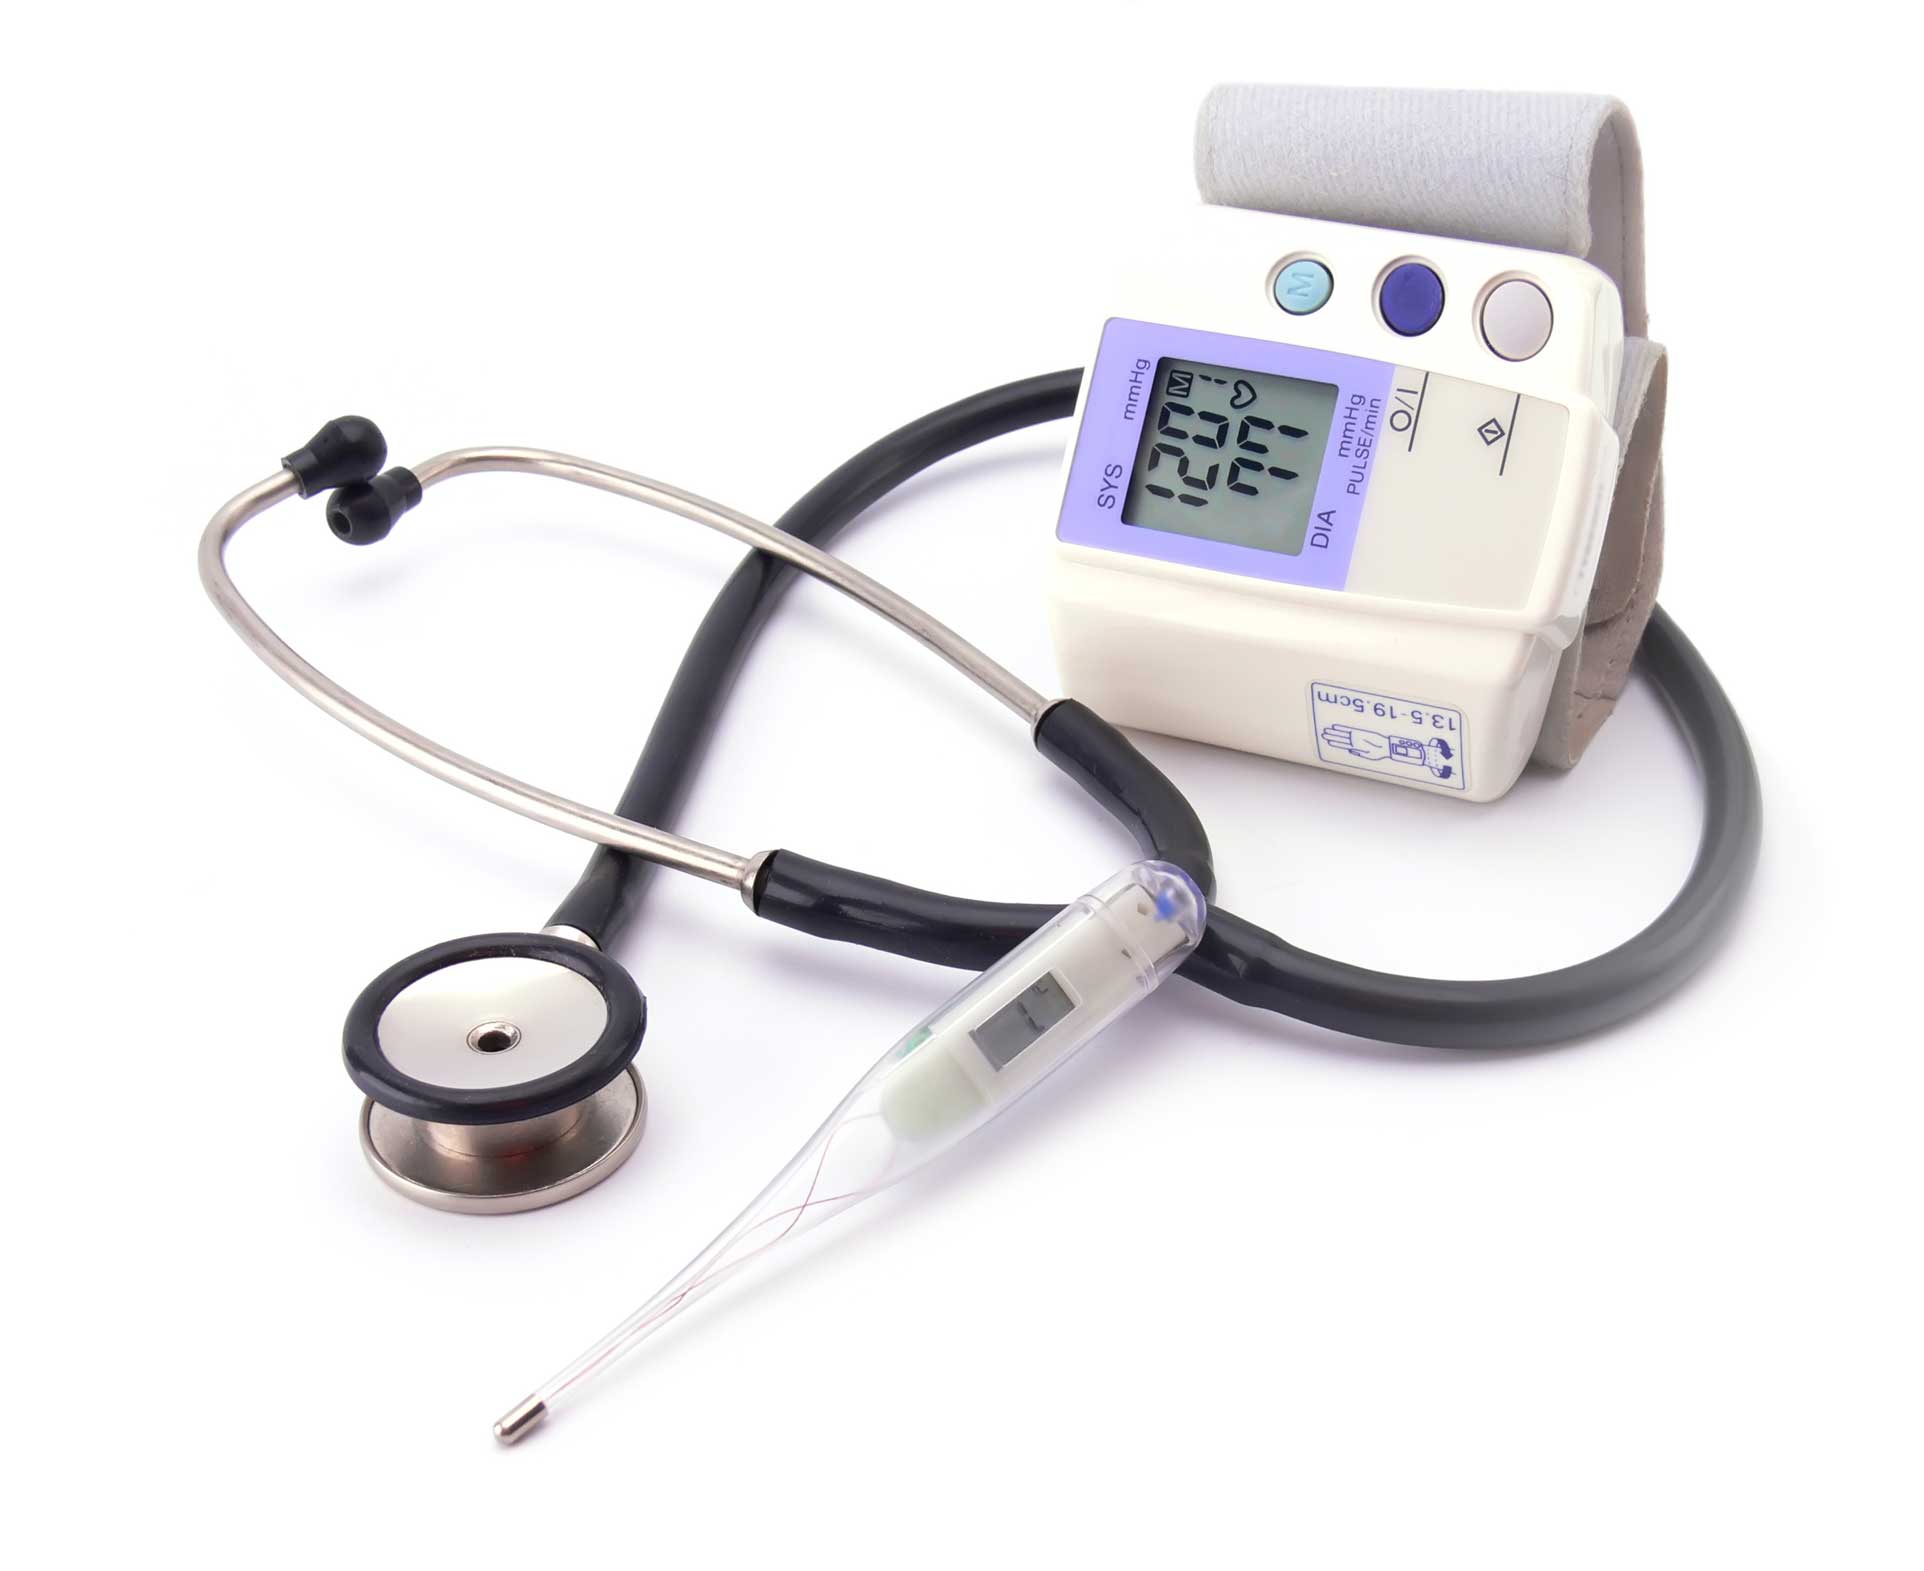 Remote Patient Monitoring: Blood Pressure Monitor and Thermometer